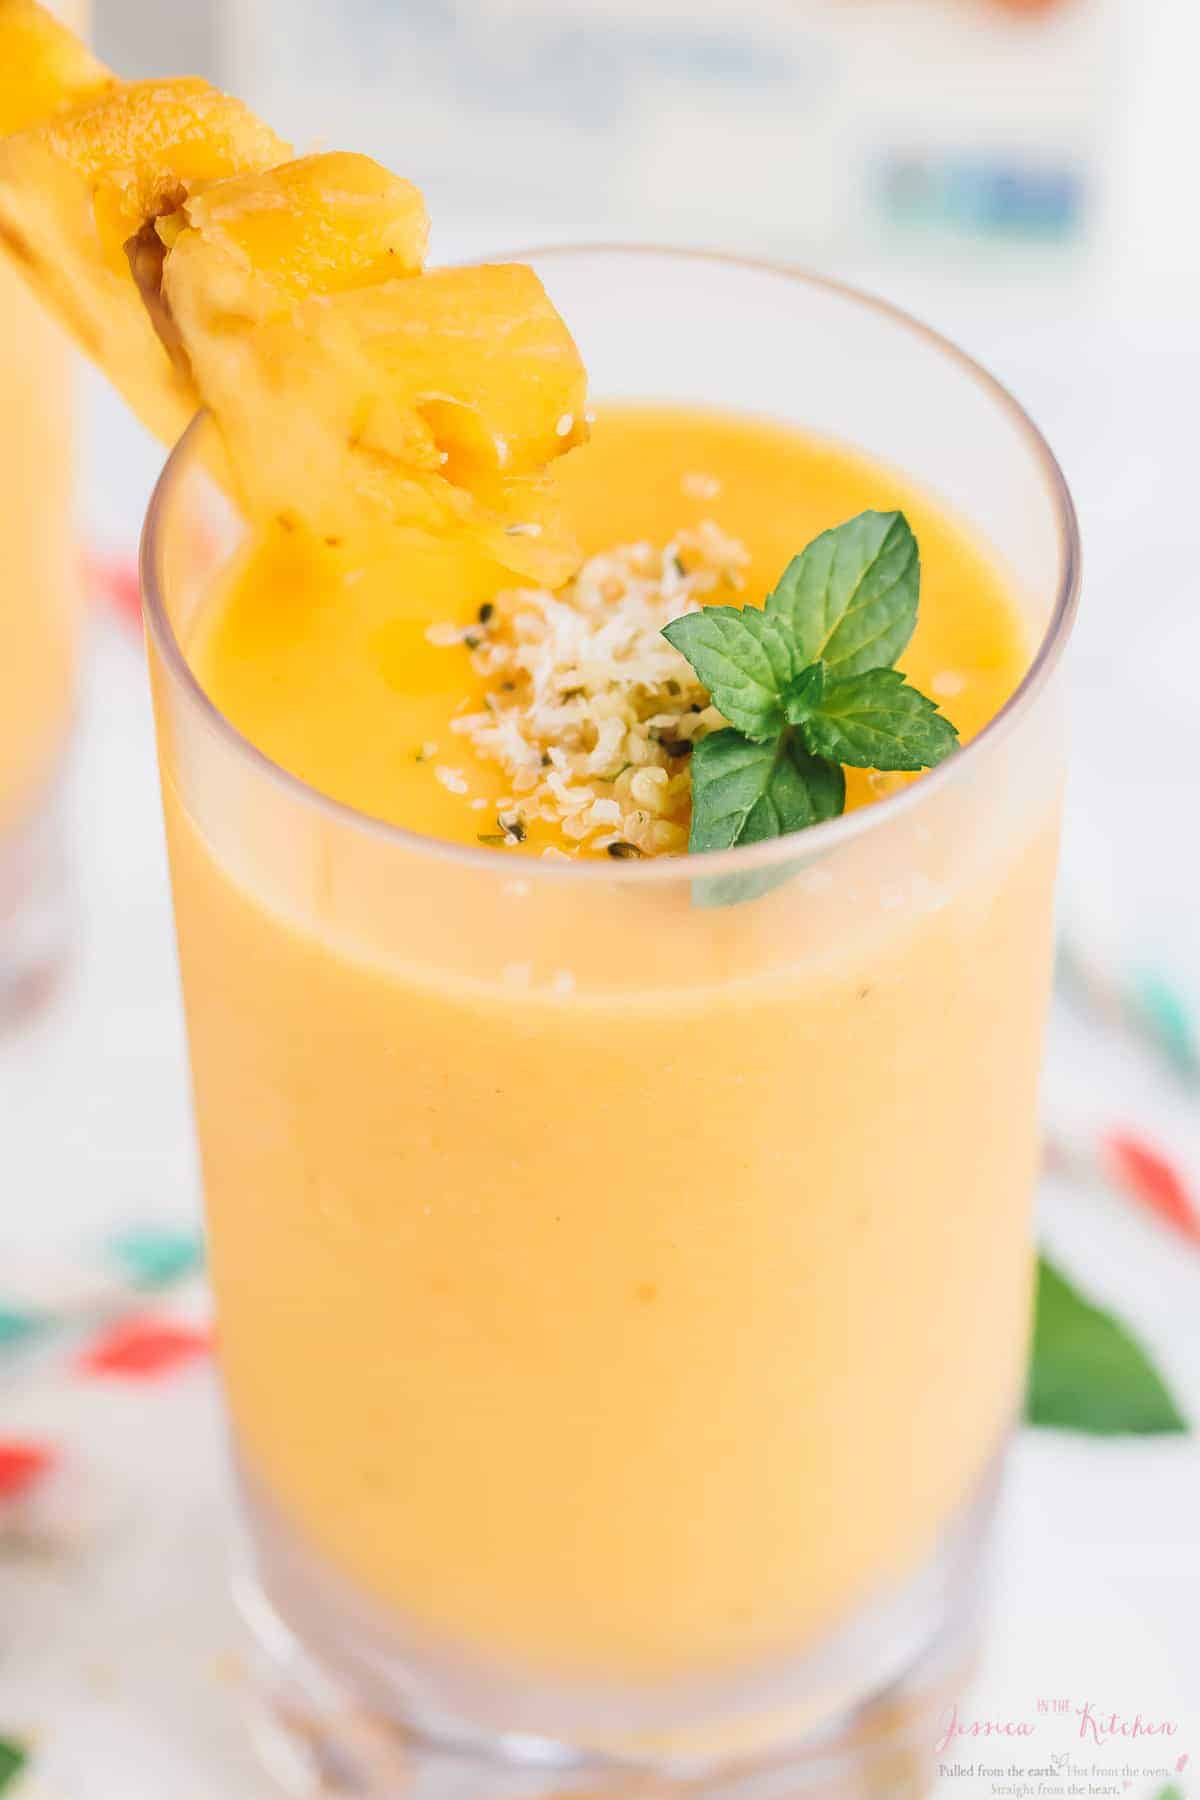 A pineapple peach smoothie in a glass with mint garnish.